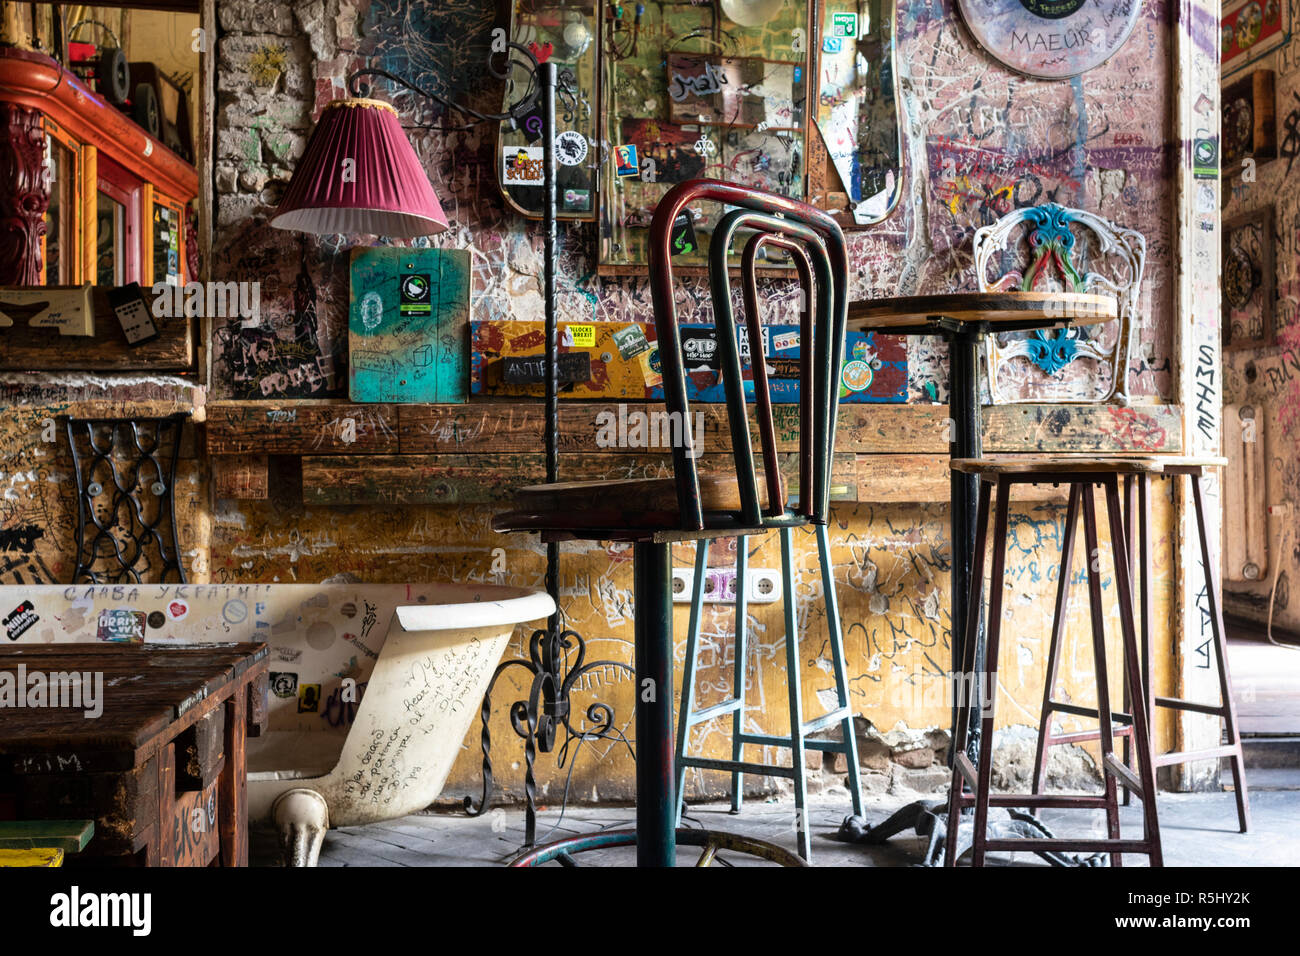 BUDAPEST, HUNGARY - August 12, 2018: Interiors with tattered vintage furniture in Szimpla kert ruin pub and farmers market, a popular tourist destinat Stock Photo